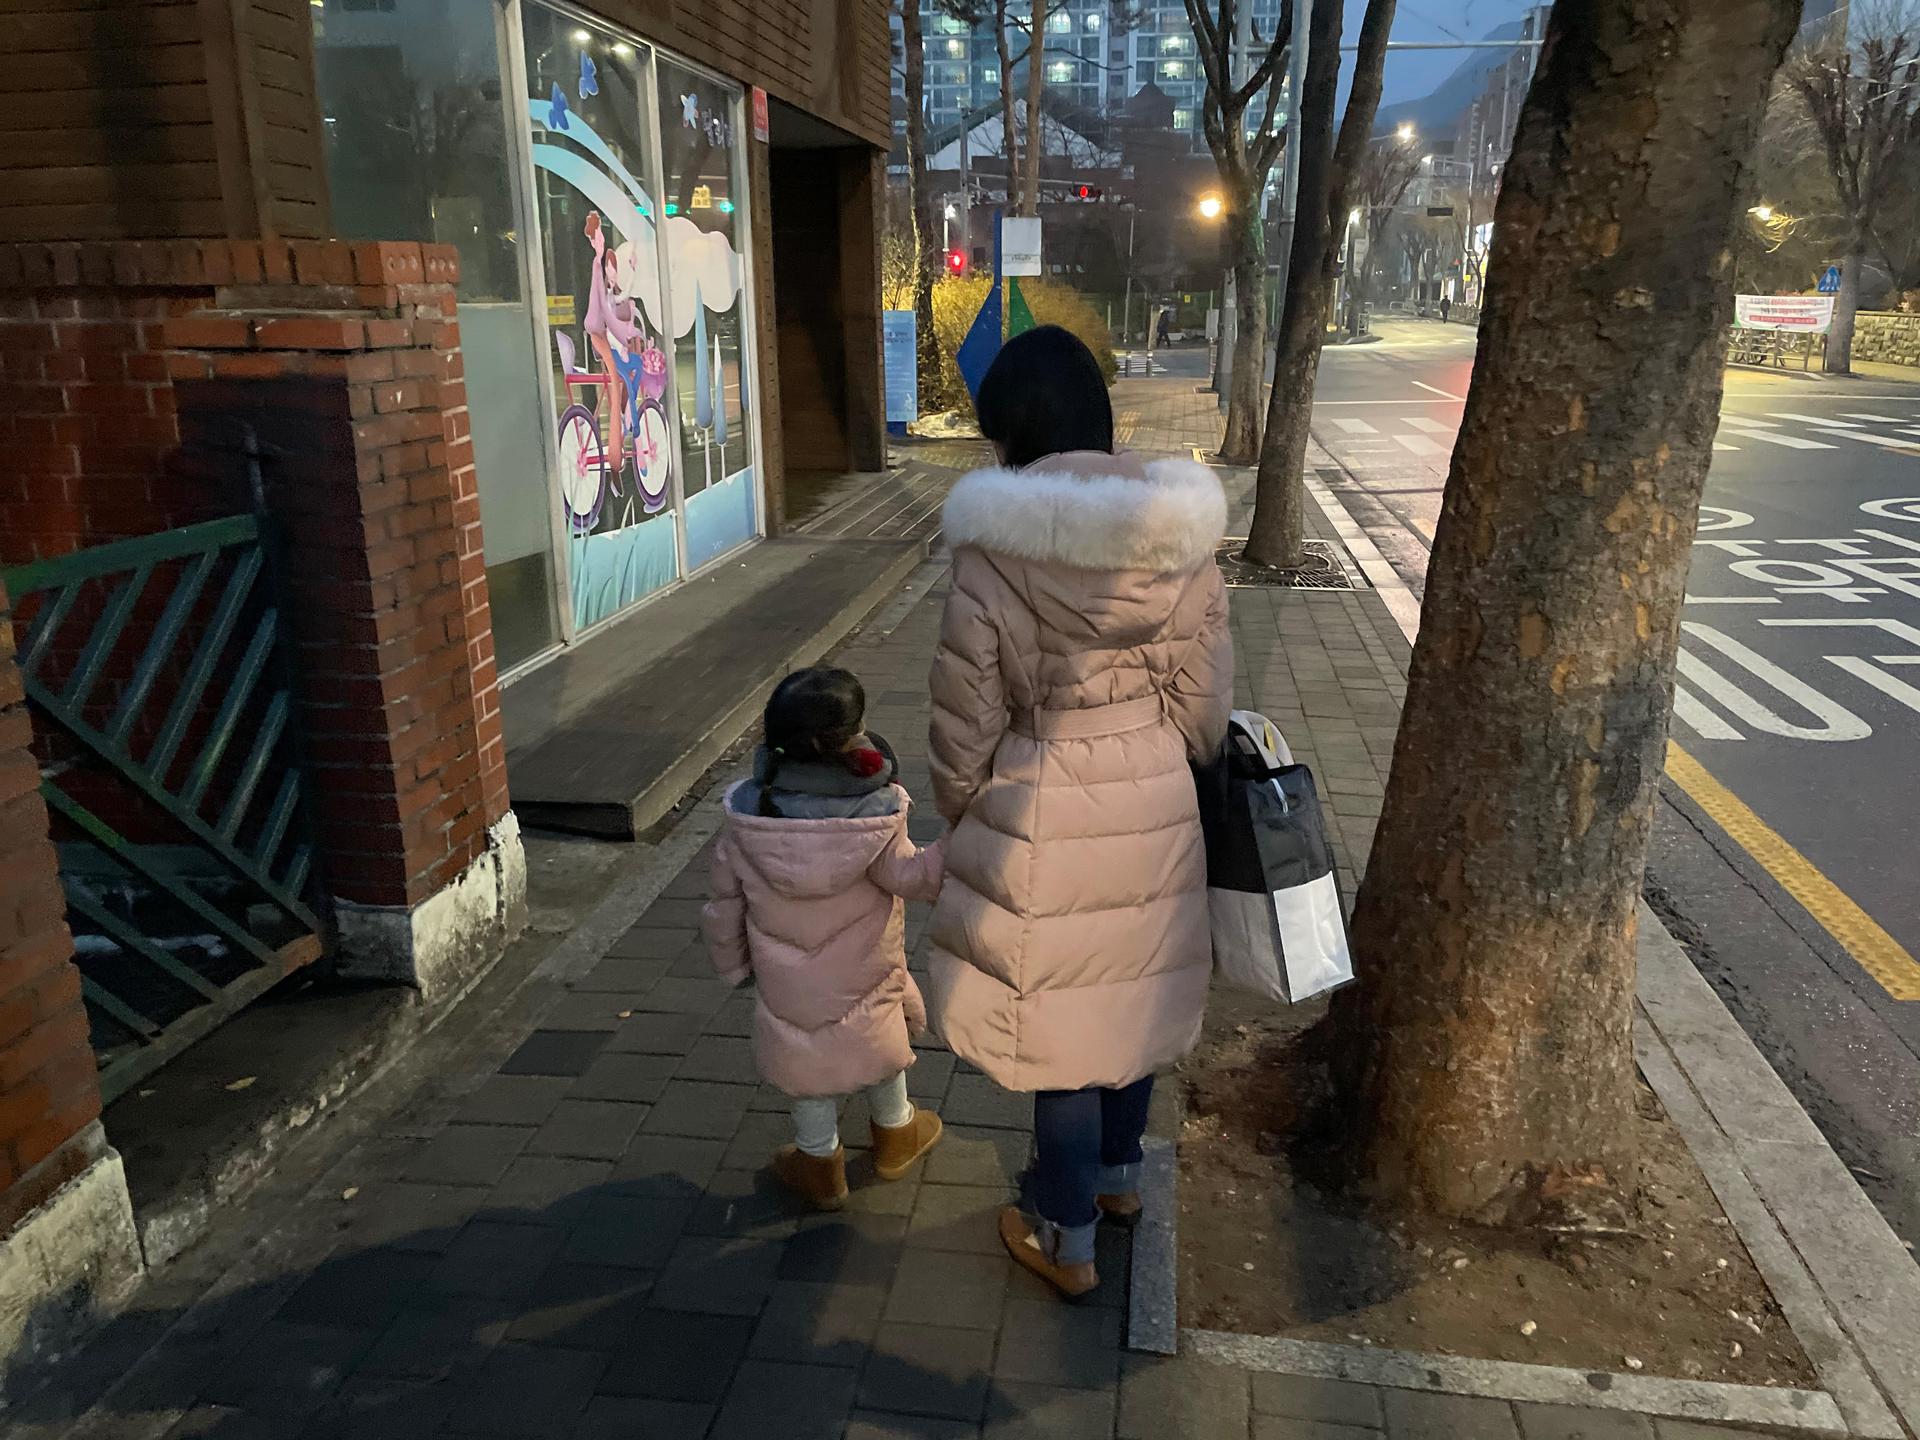 Kim, an advocate at the Korean Unwed Mothers Families' Association, a support group in Seoul, South Korea, walks with her daughter. She asked that her full name not be used due to the stigma associated with being a single mother.